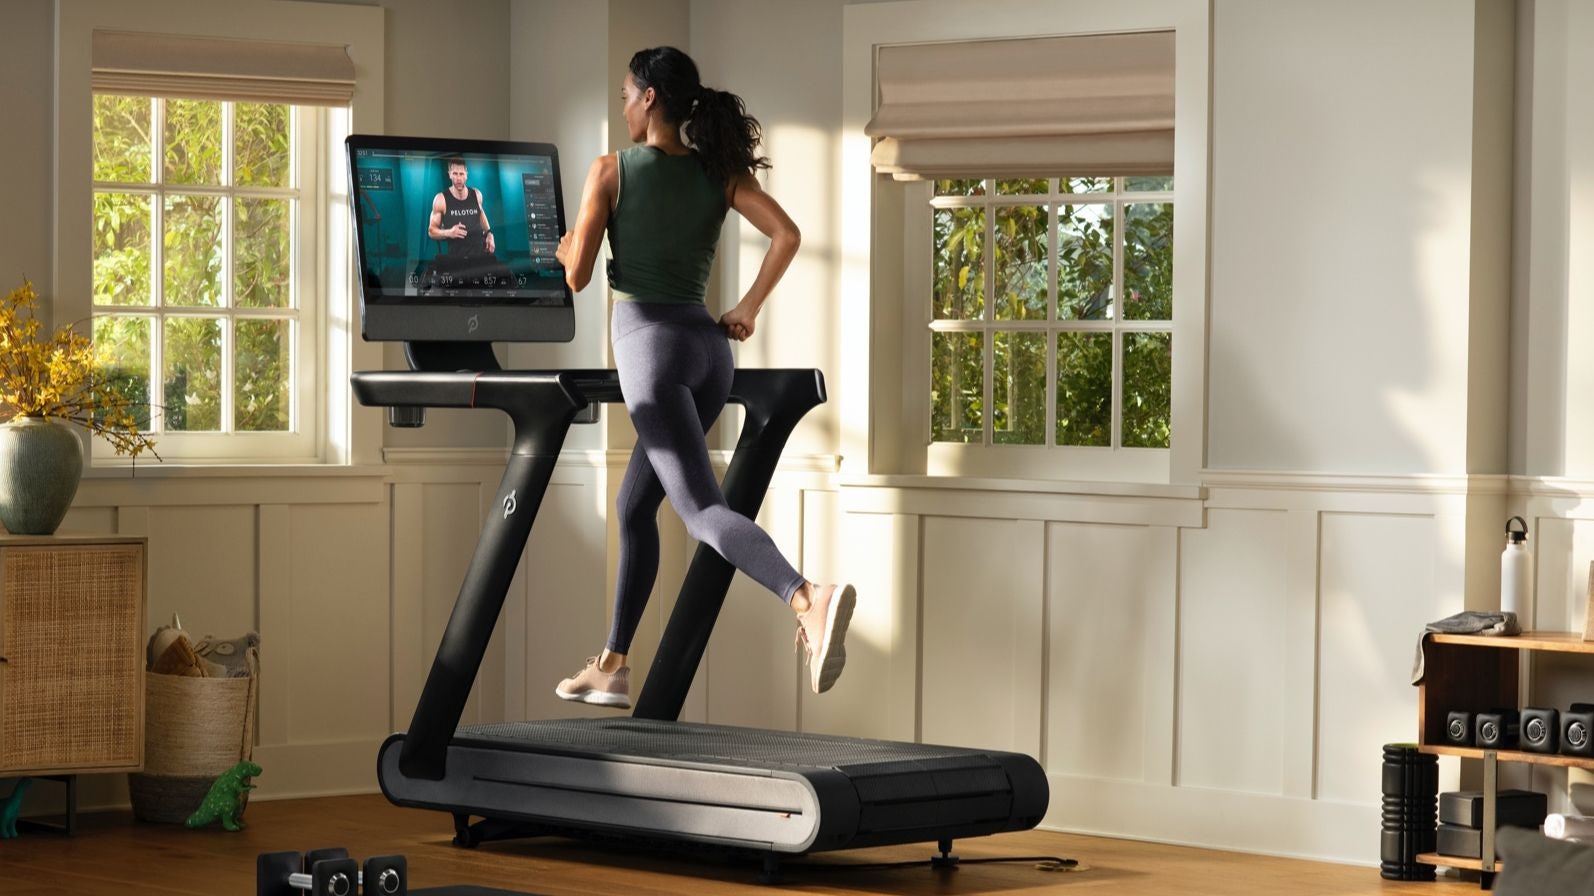 What Luxury Brands Can Learn From Peloton’s Treadmill Crisis